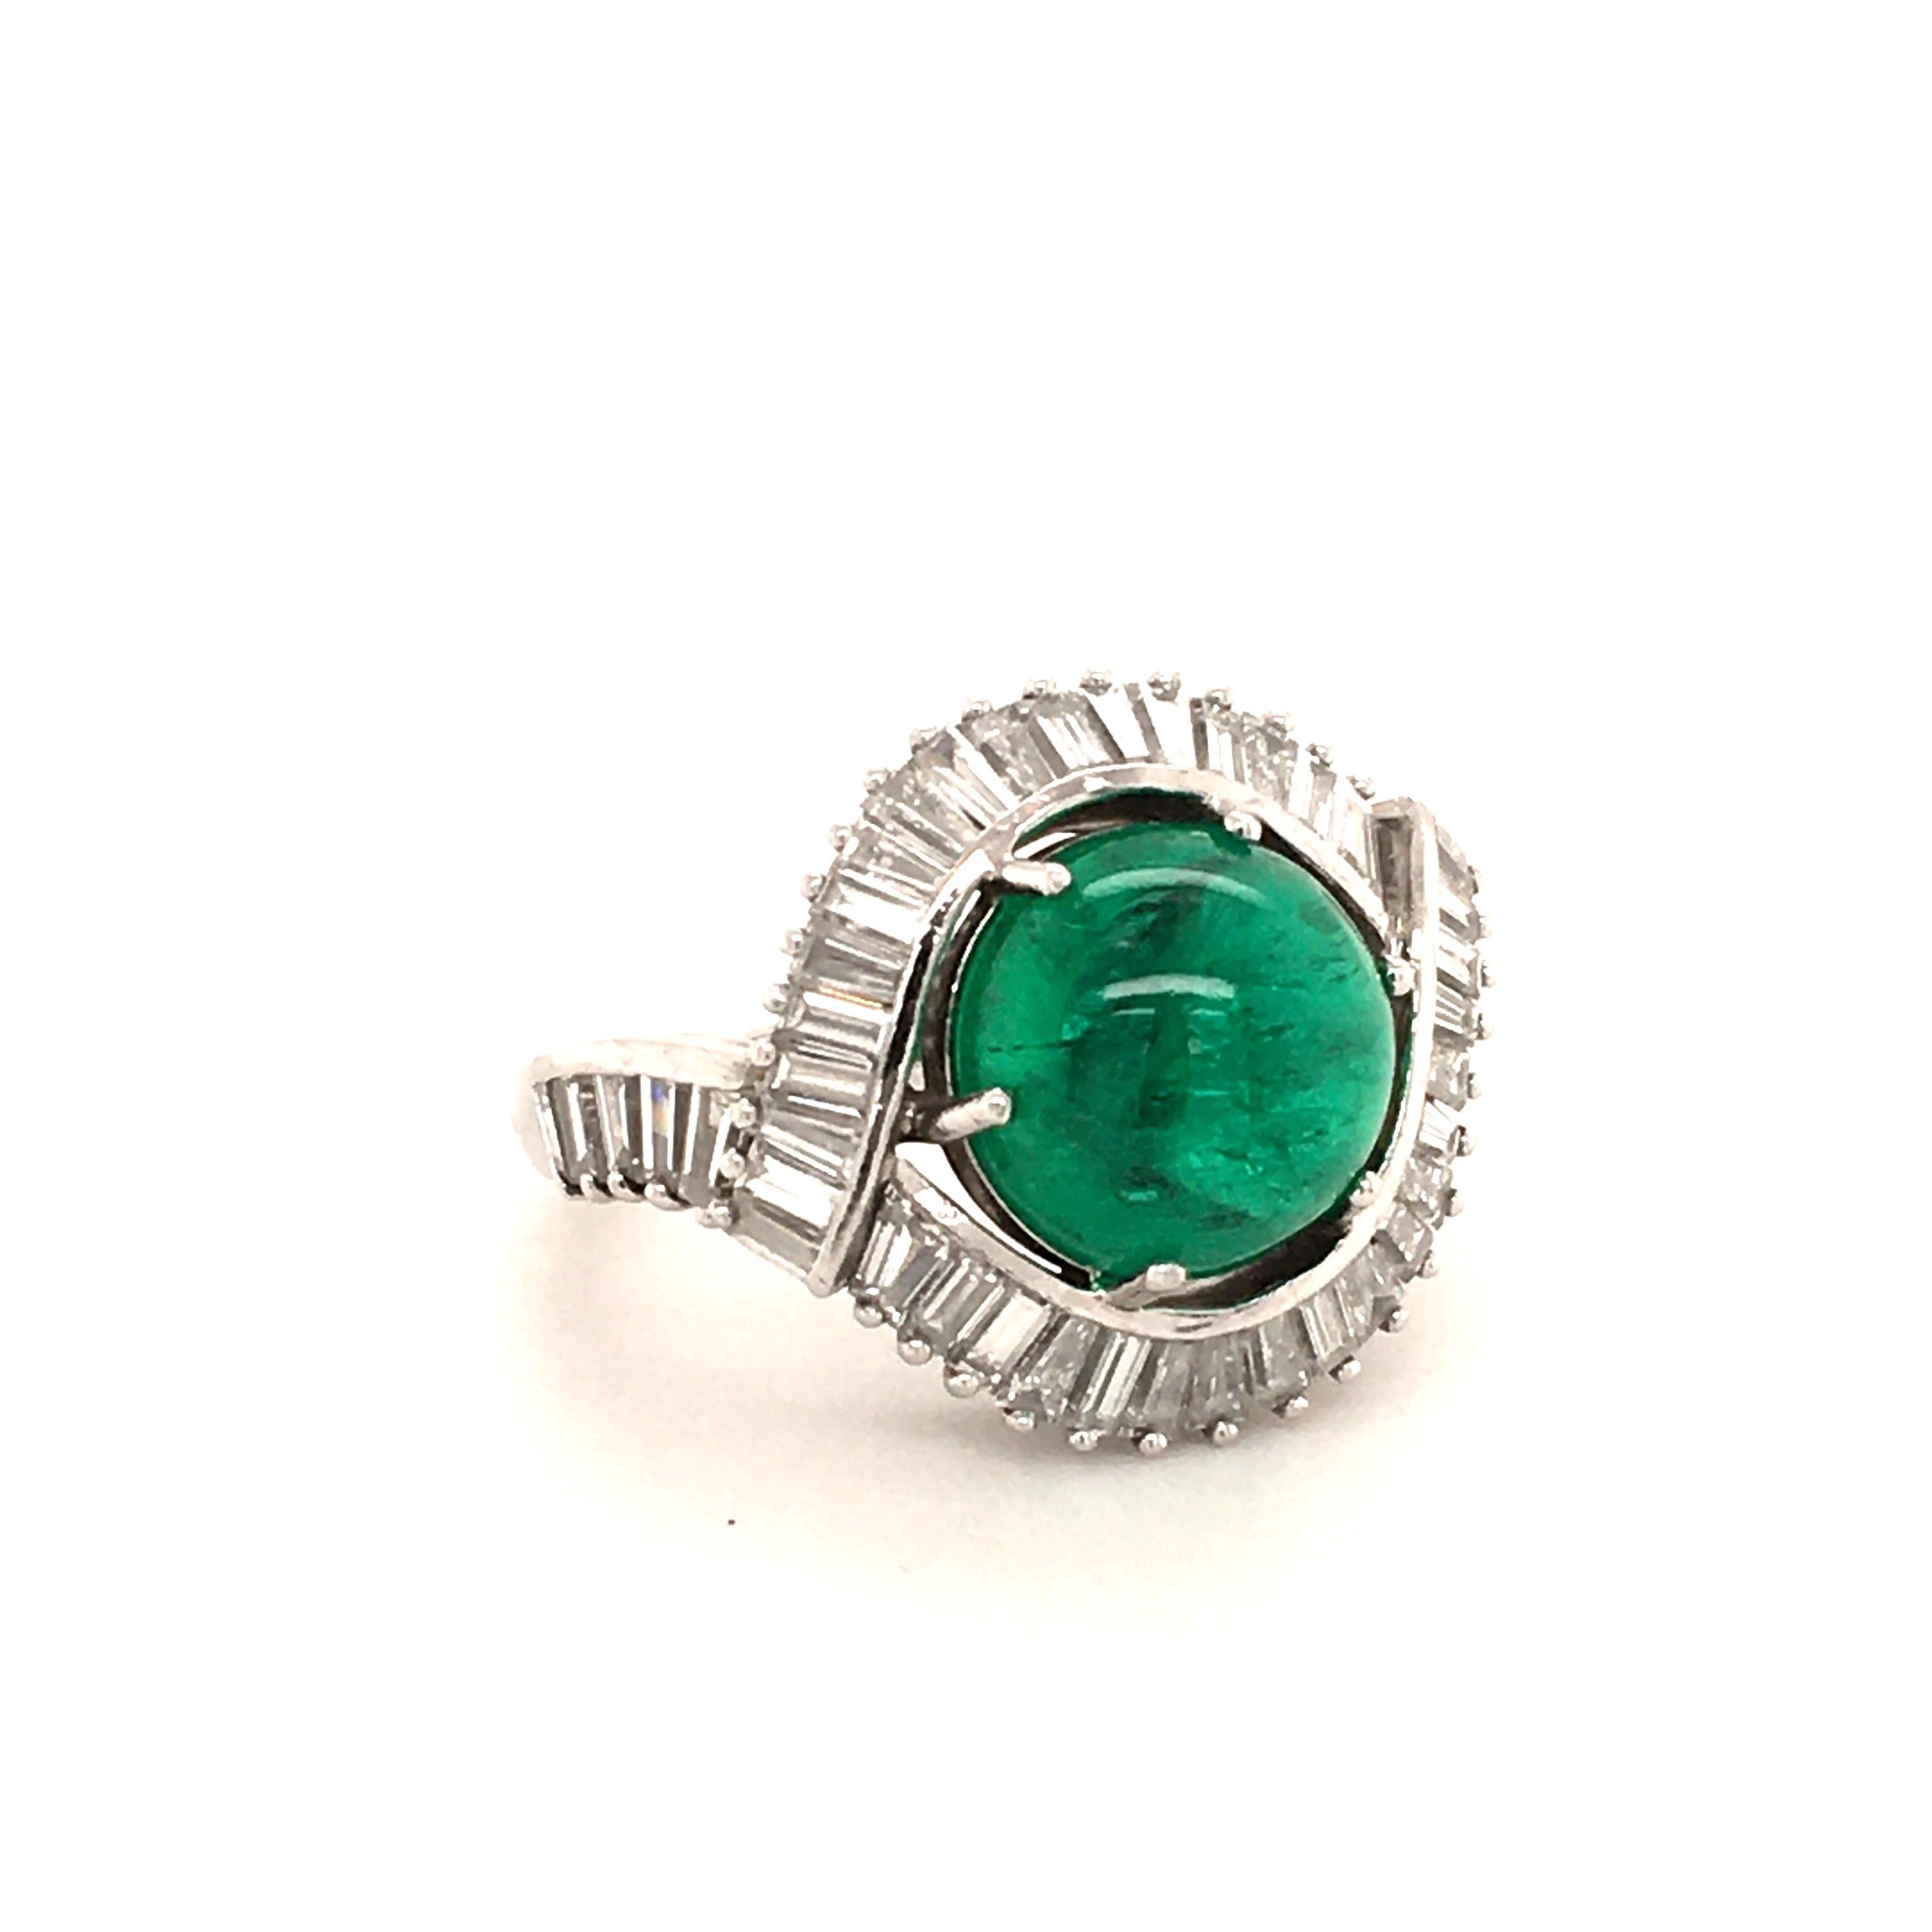 5.69 Carat Colombian Emerald and Diamond Ring in Platinum 950 For Sale 3